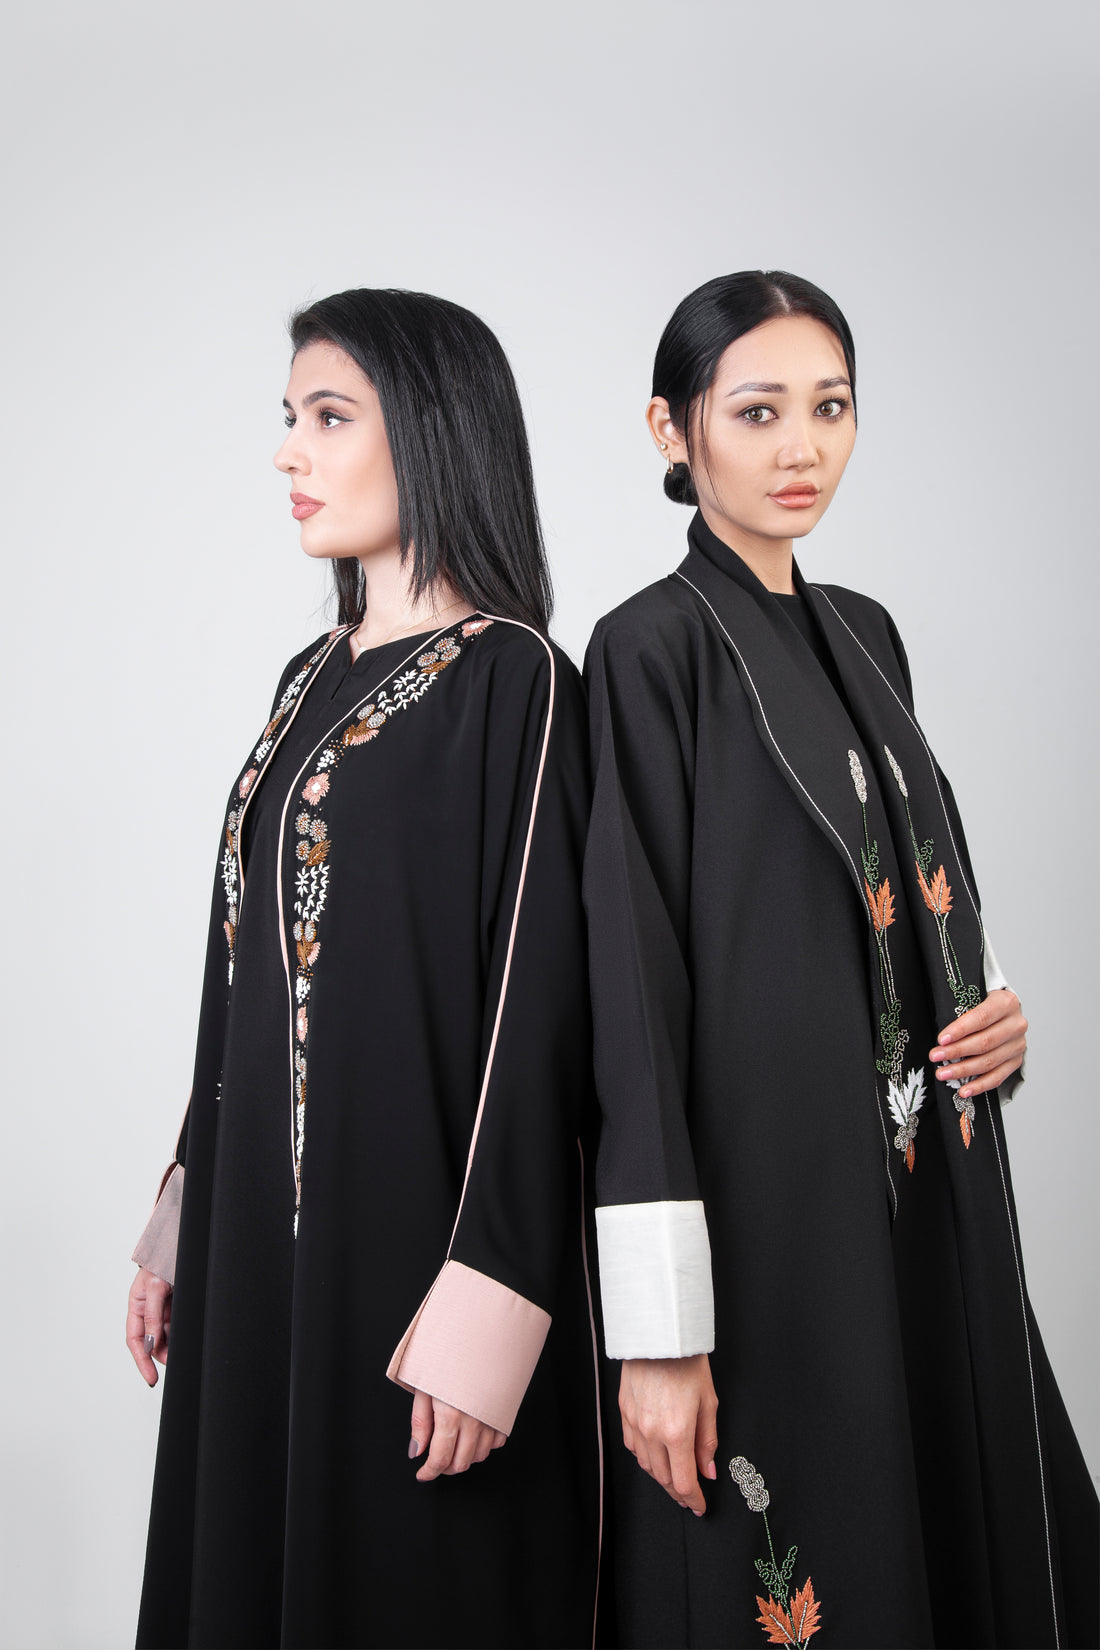 Abaya | A classic modest fashion choice that never goes out of style